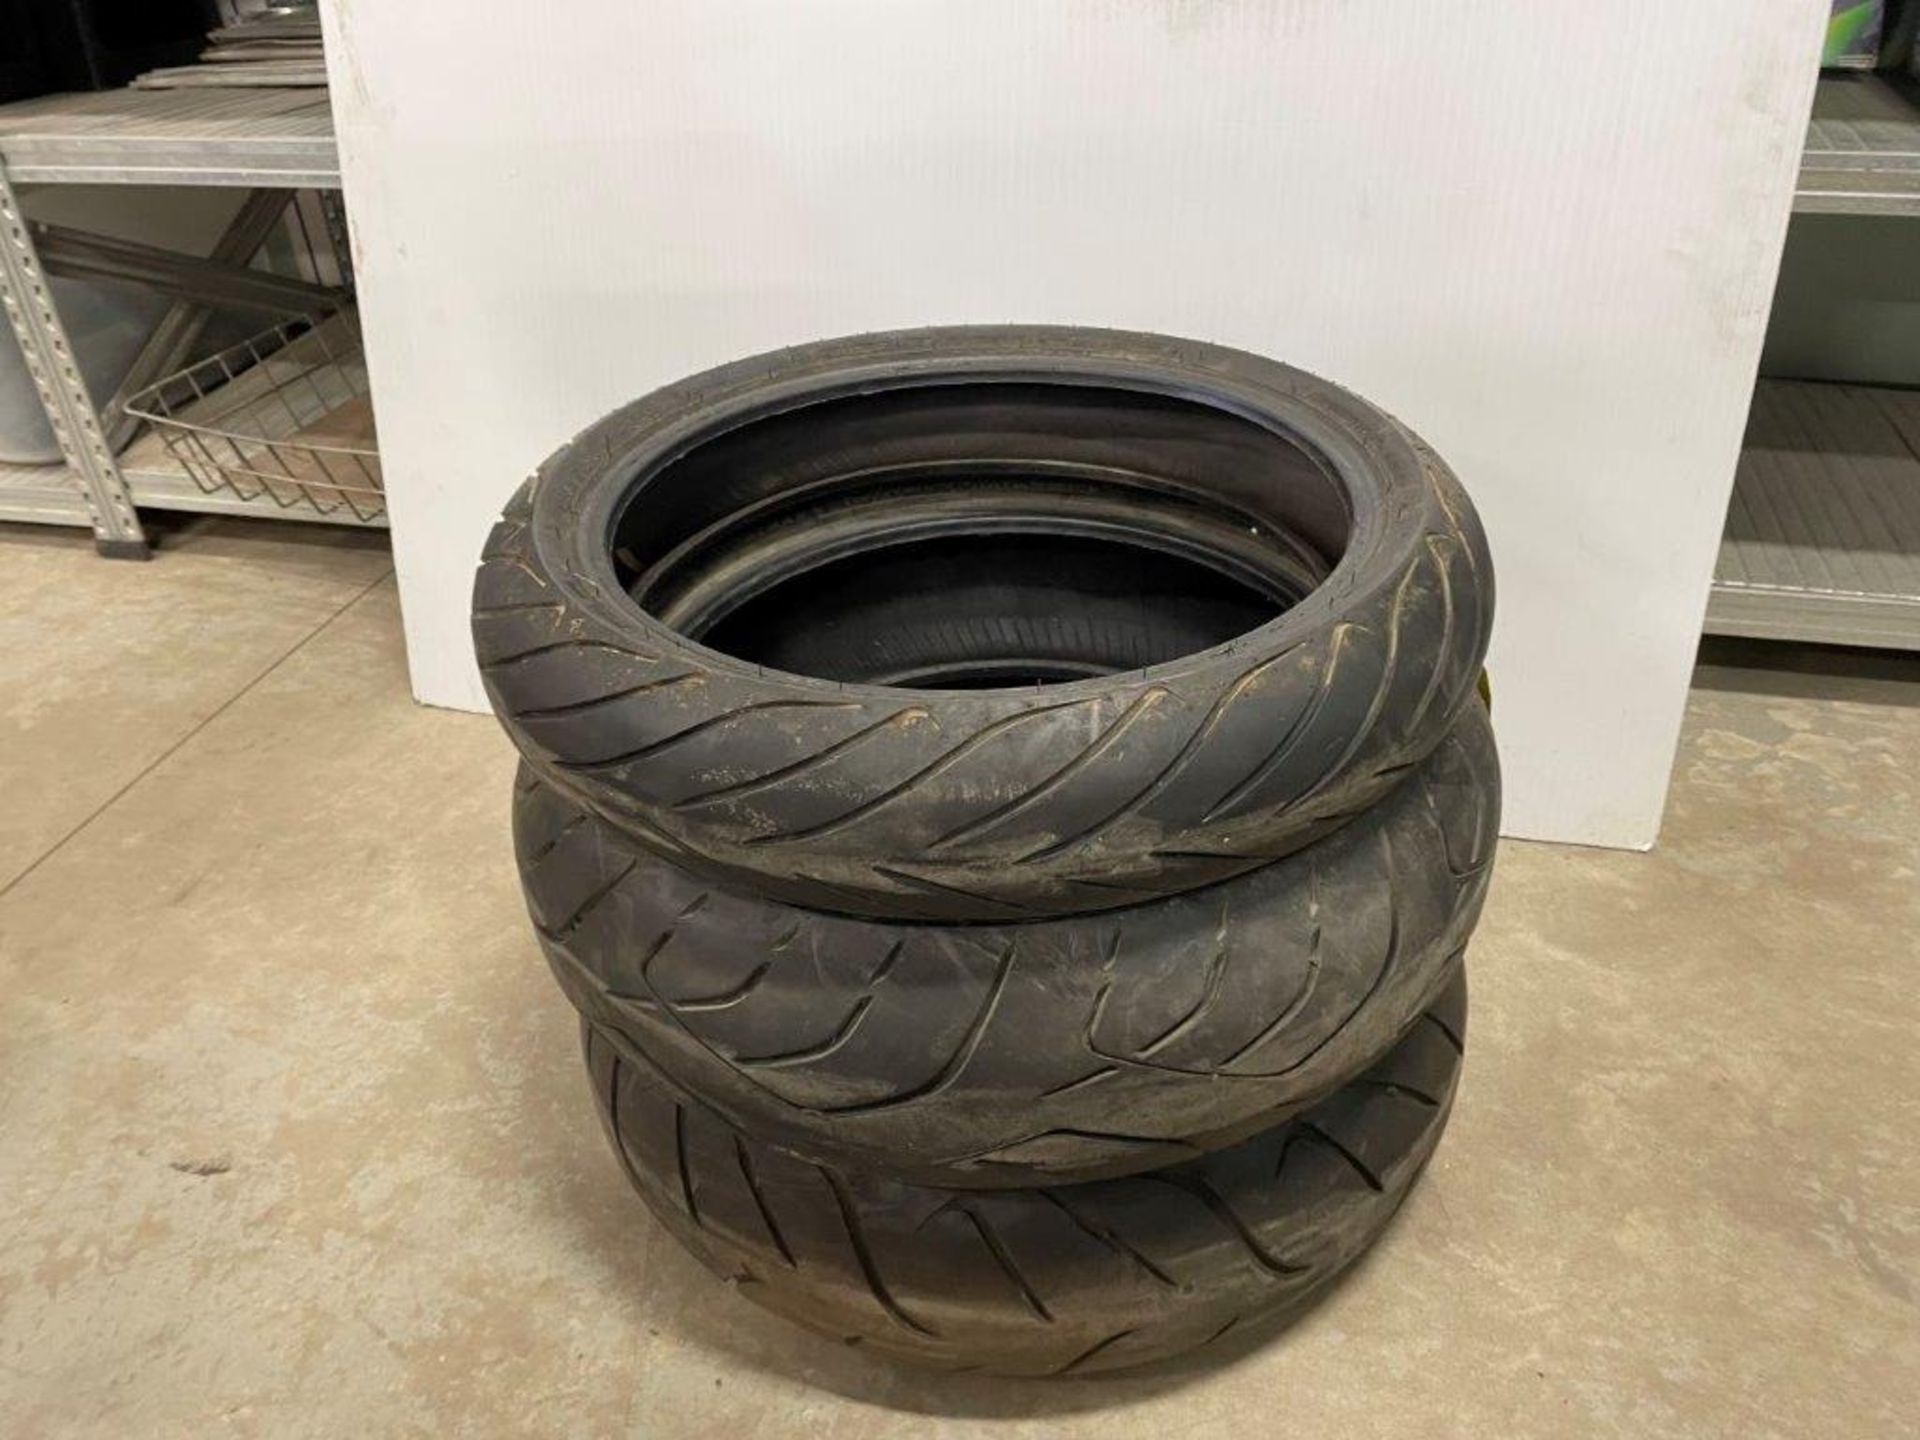 2-REAR MOTORCYCLE TIRES 180/55ZR 17M, 1-FRONT 120/70ZR 17M AND STREET MOTORCYCLE WINDSHIELDS